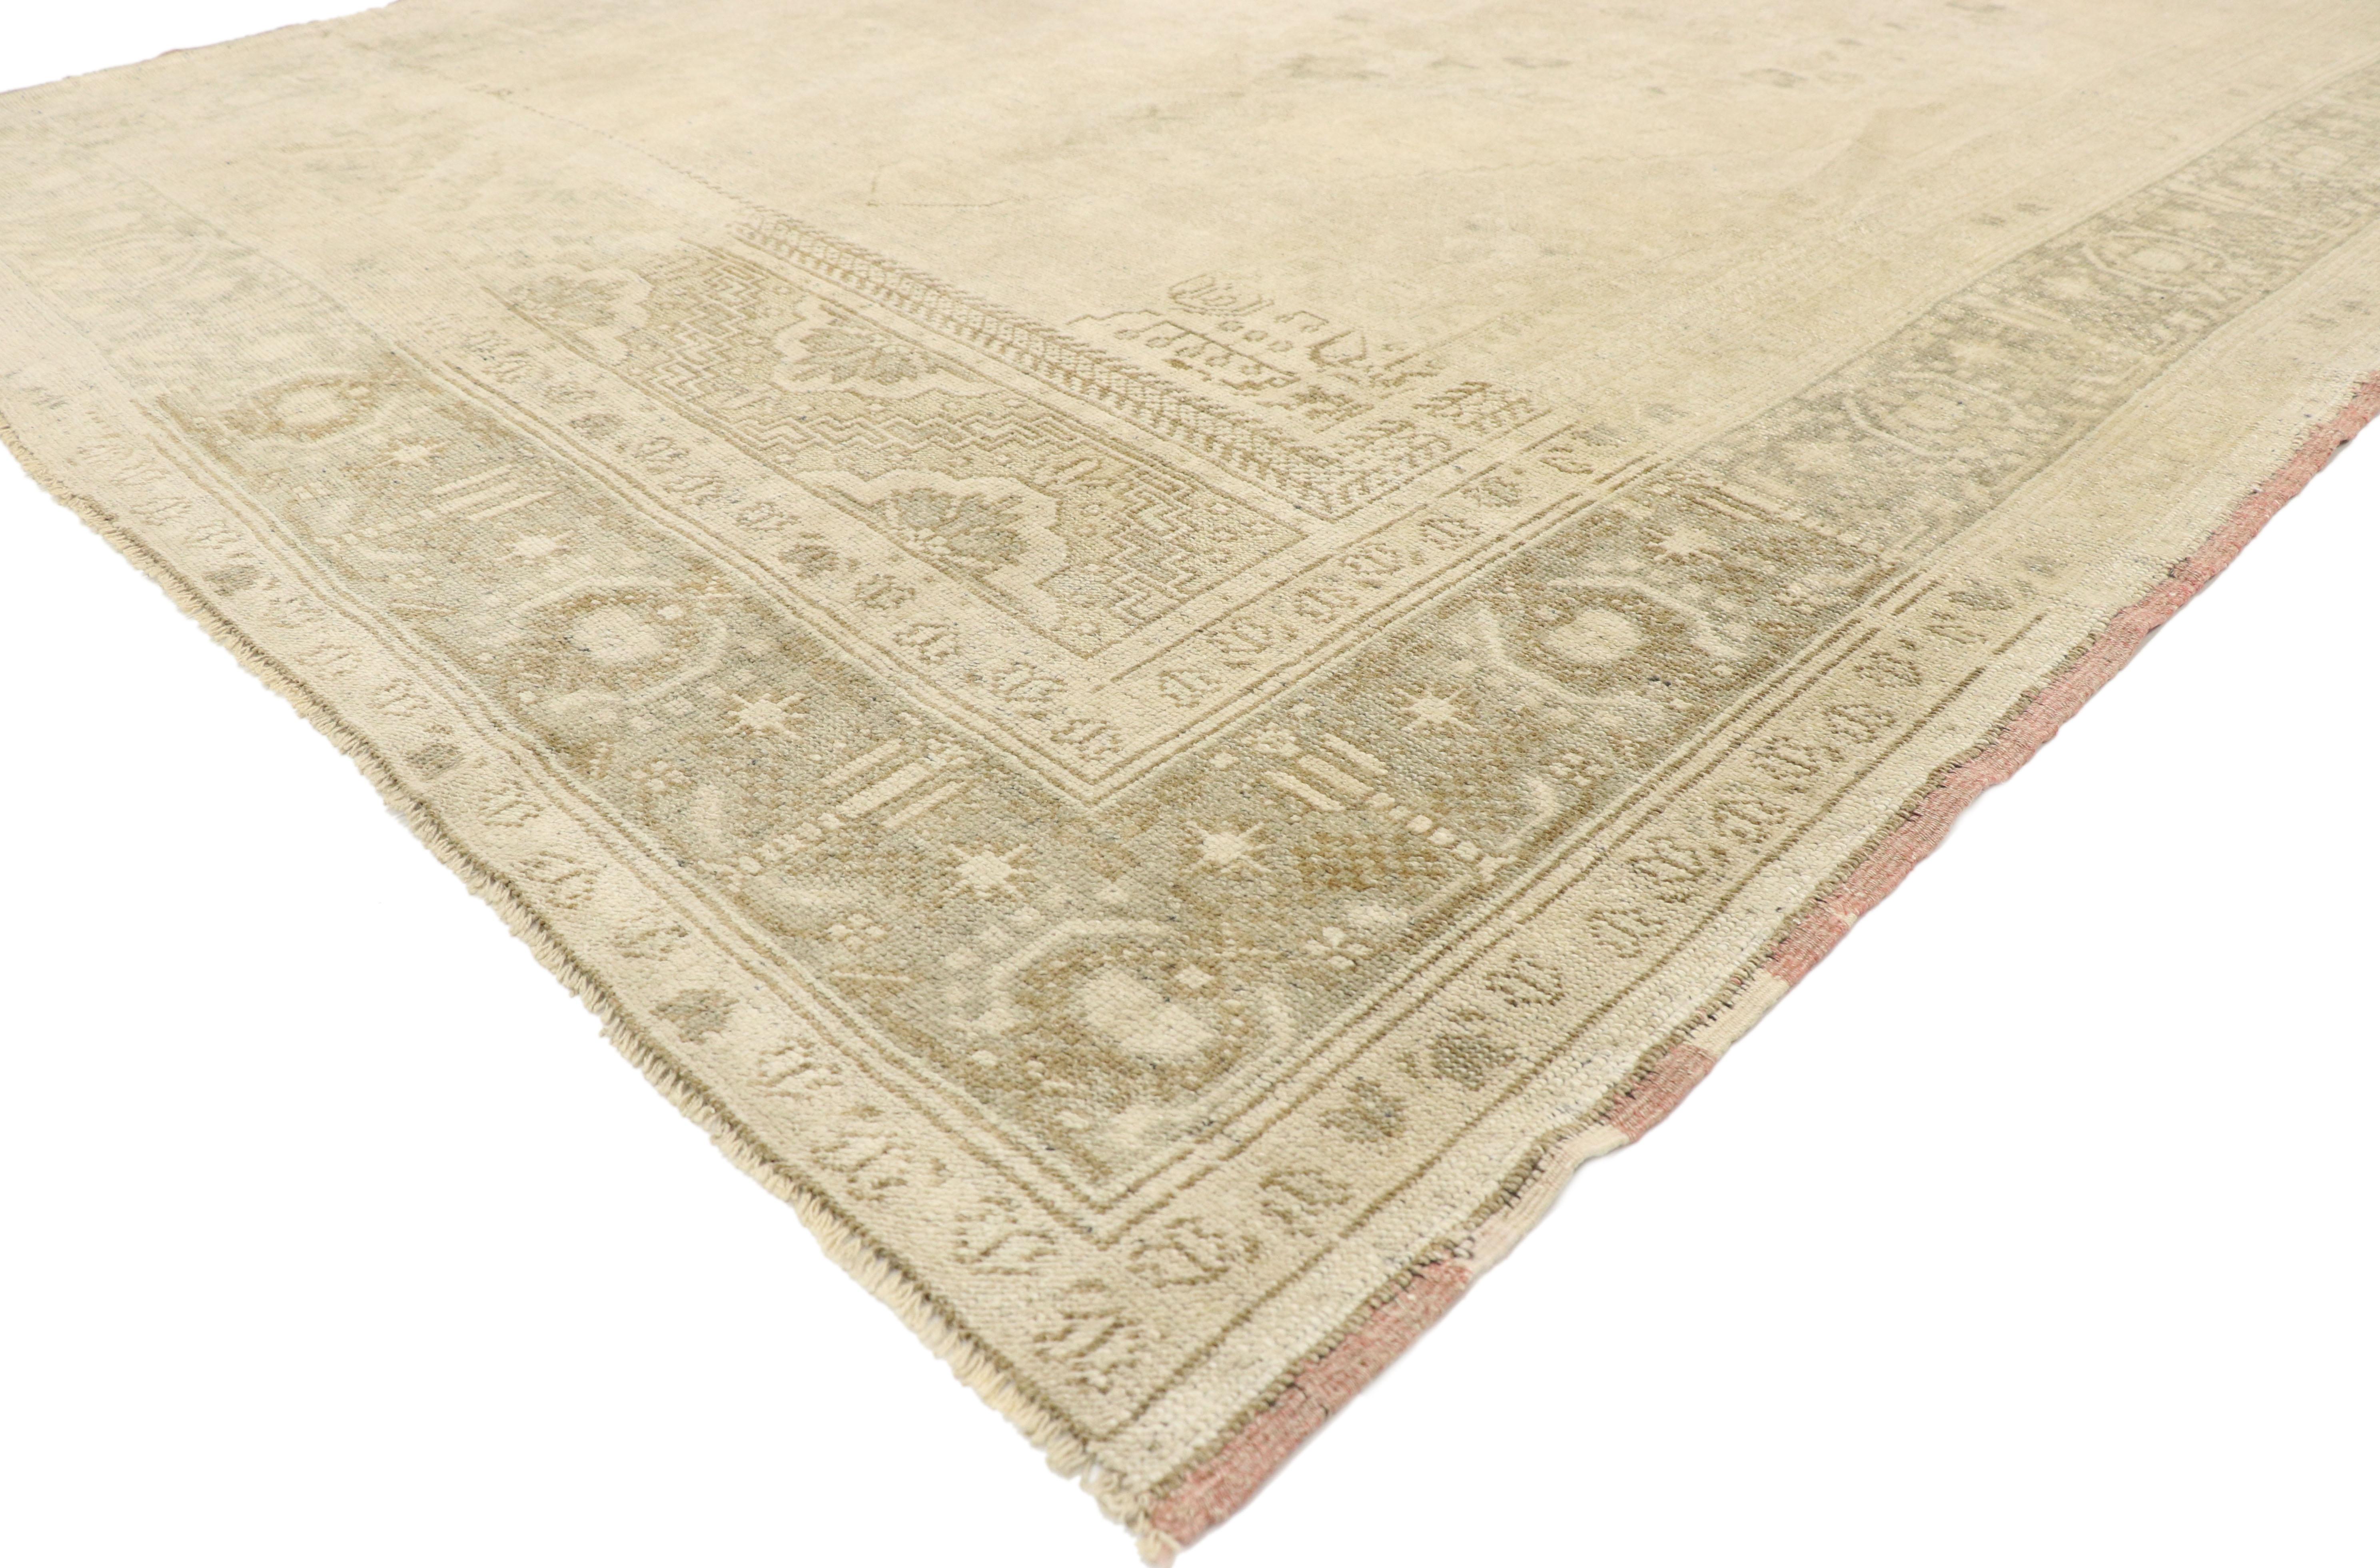 52834 Muted Vintage Turkish Oushak Rug, 06'05 x 11'01.
Emanating sophistication and grace, this hand knotted wool vintage Turkish Oushak rug provides an elegant and genteel design aesthetic with soft subtle hues. A cusped oval medallion with